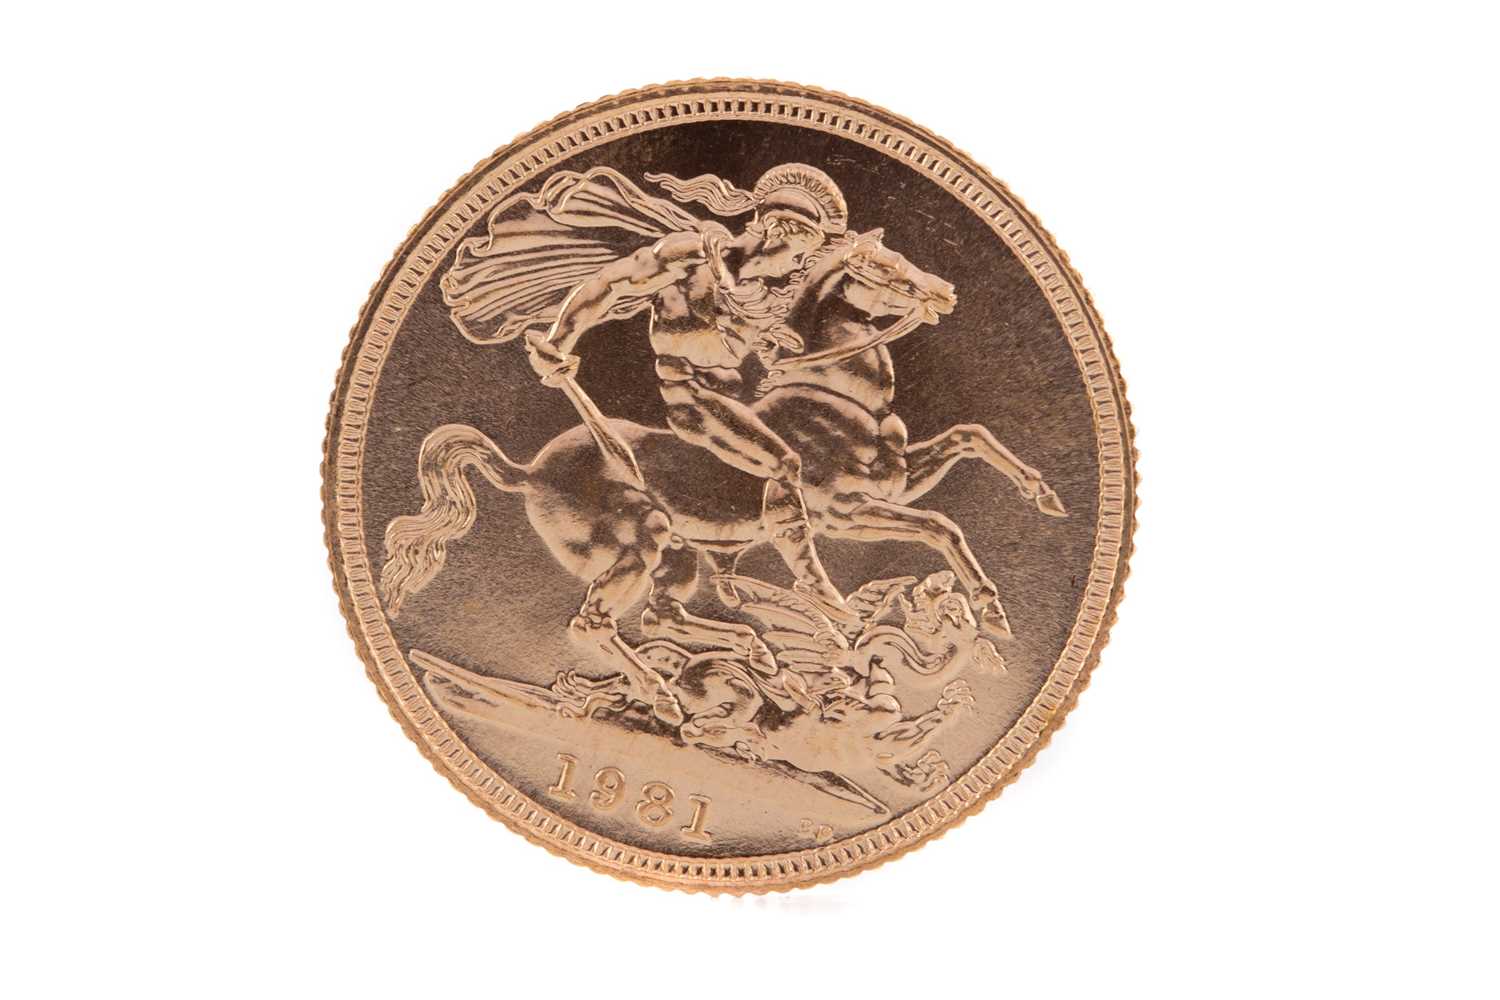 Lot 99 - AN ELIZABETH II GOLD SOVEREIGN DATED 1981